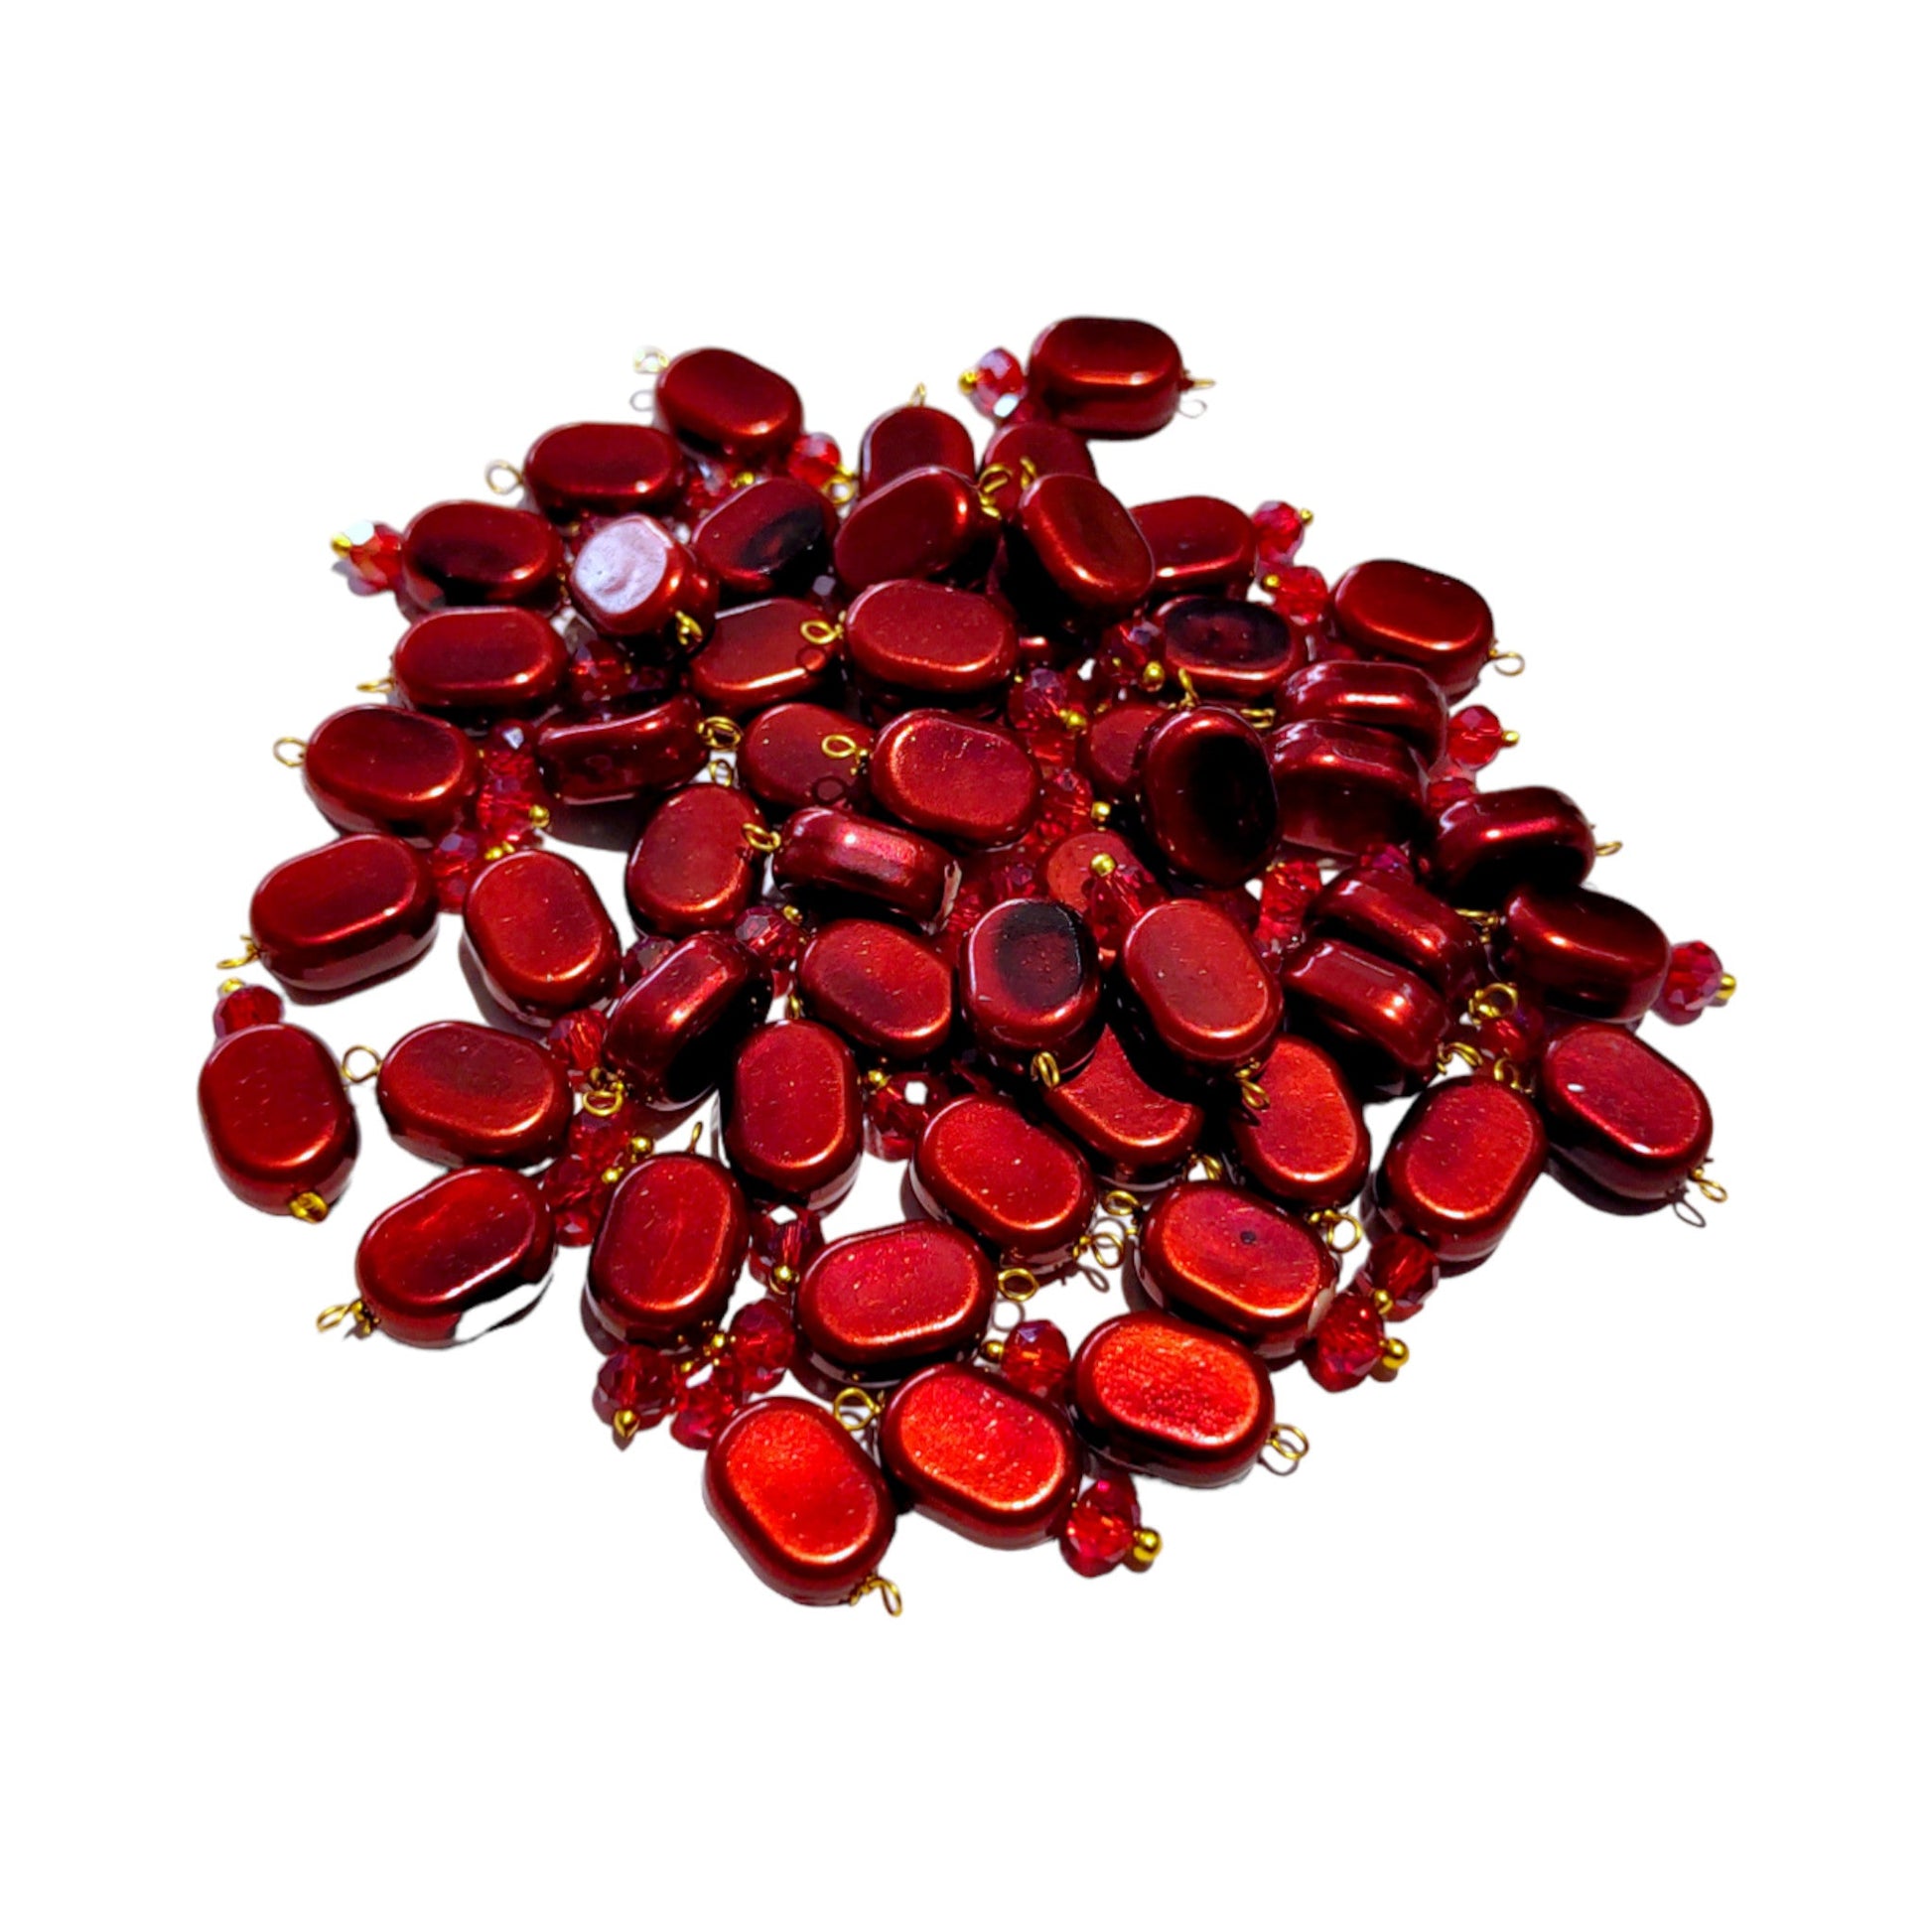 Indian Petals 100Pcs Colored Plastic Bead with Crystal Ball Drop for Craft Décor or Jewelry Making, 8x12mm, Maroon